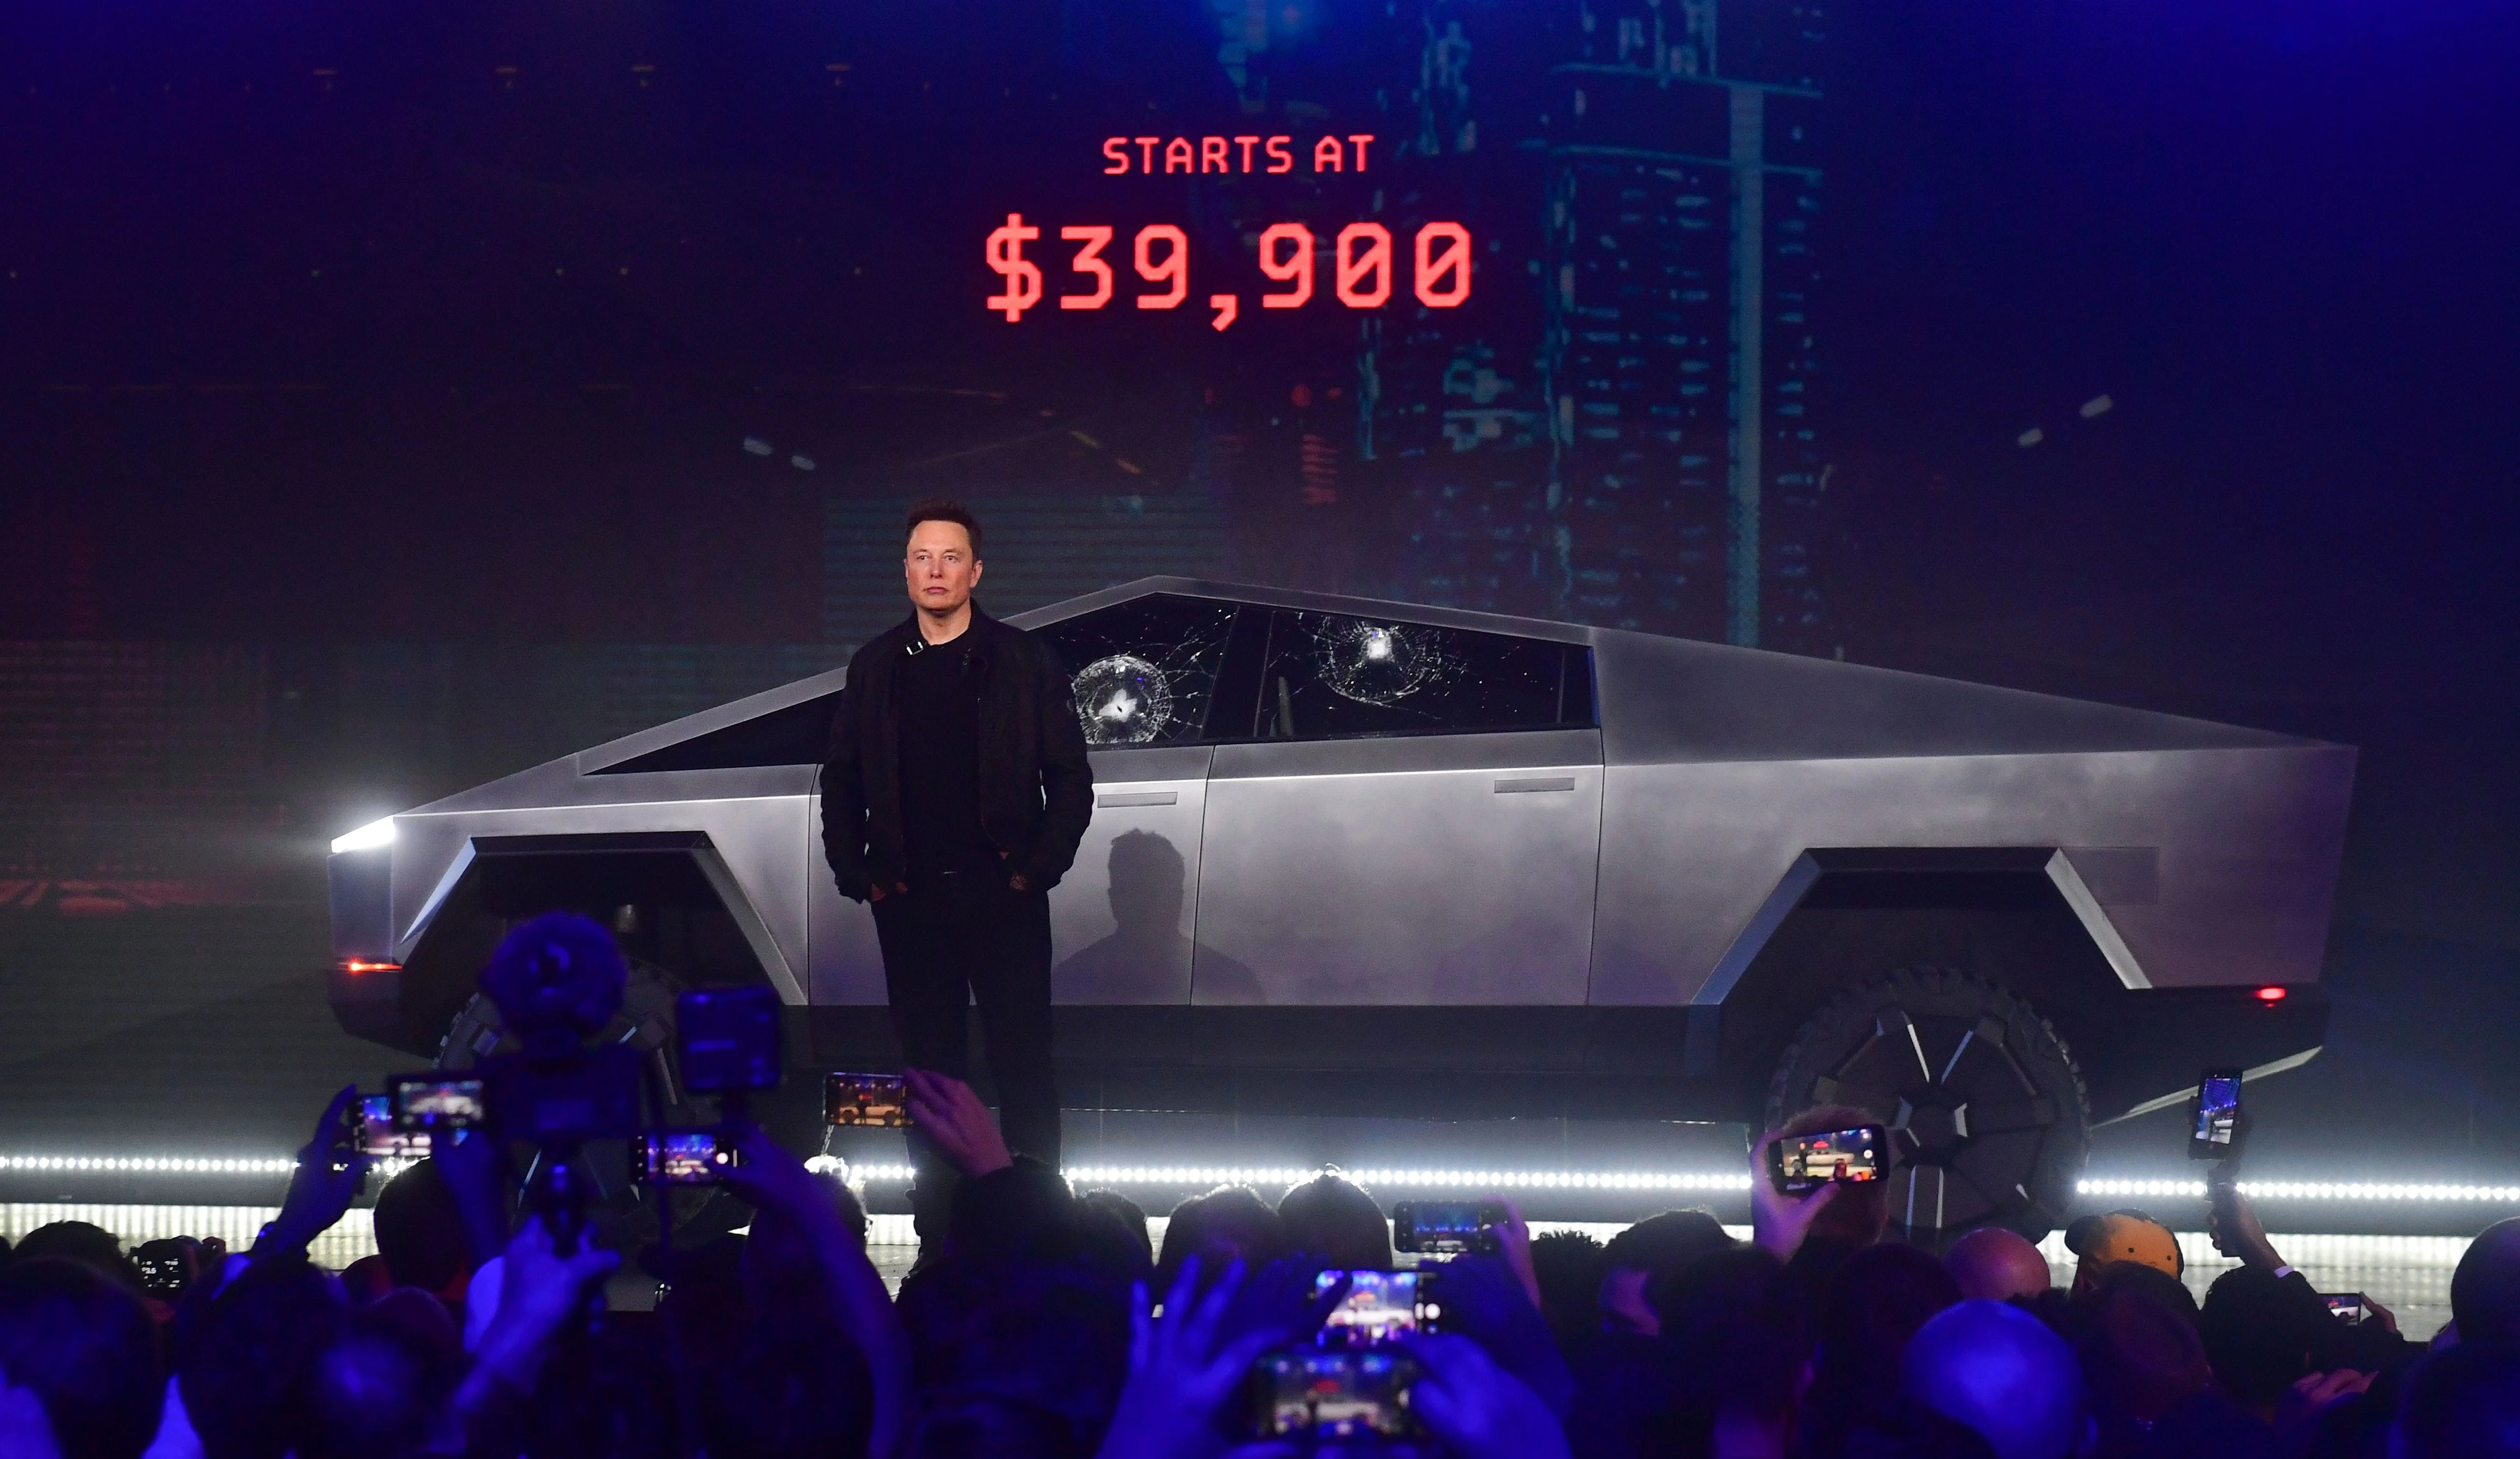 Elon Musk stands in front of Tesla's all-electric Cybertruck on a stage with the price in red lights behind him.